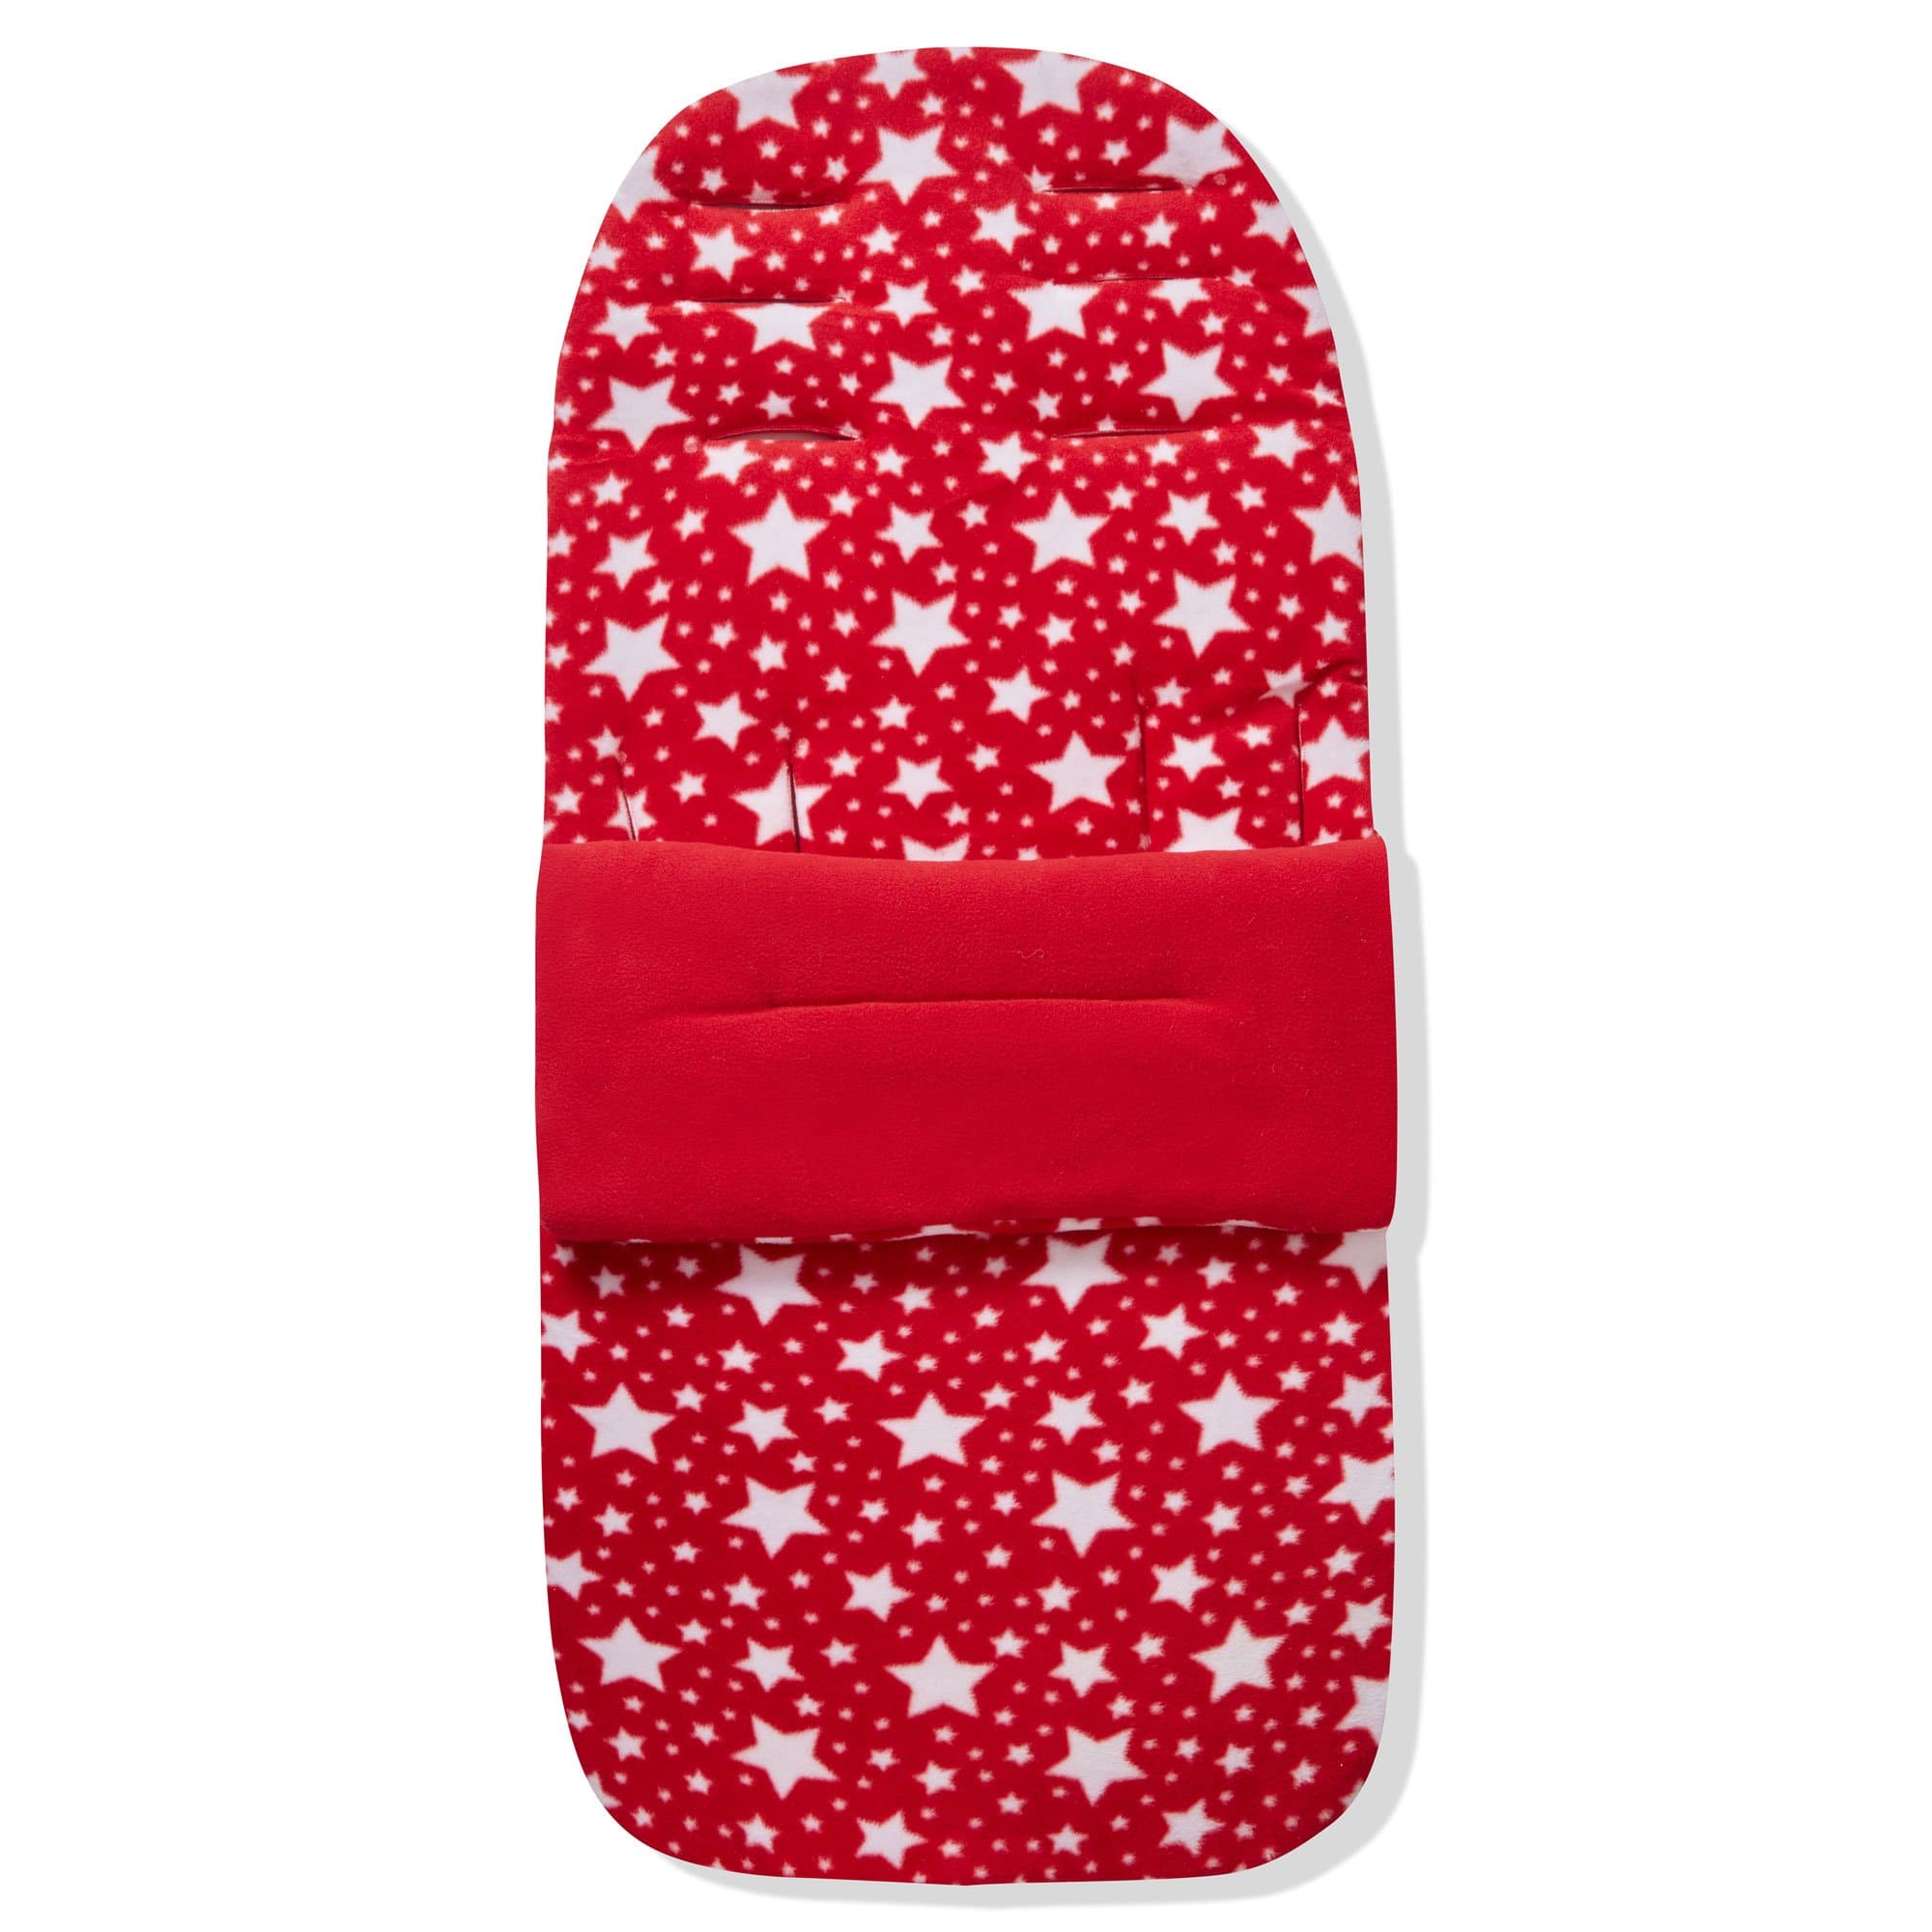 Fleece Footmuff / Cosy Toes Compatible with ABC Design - For Your Little One